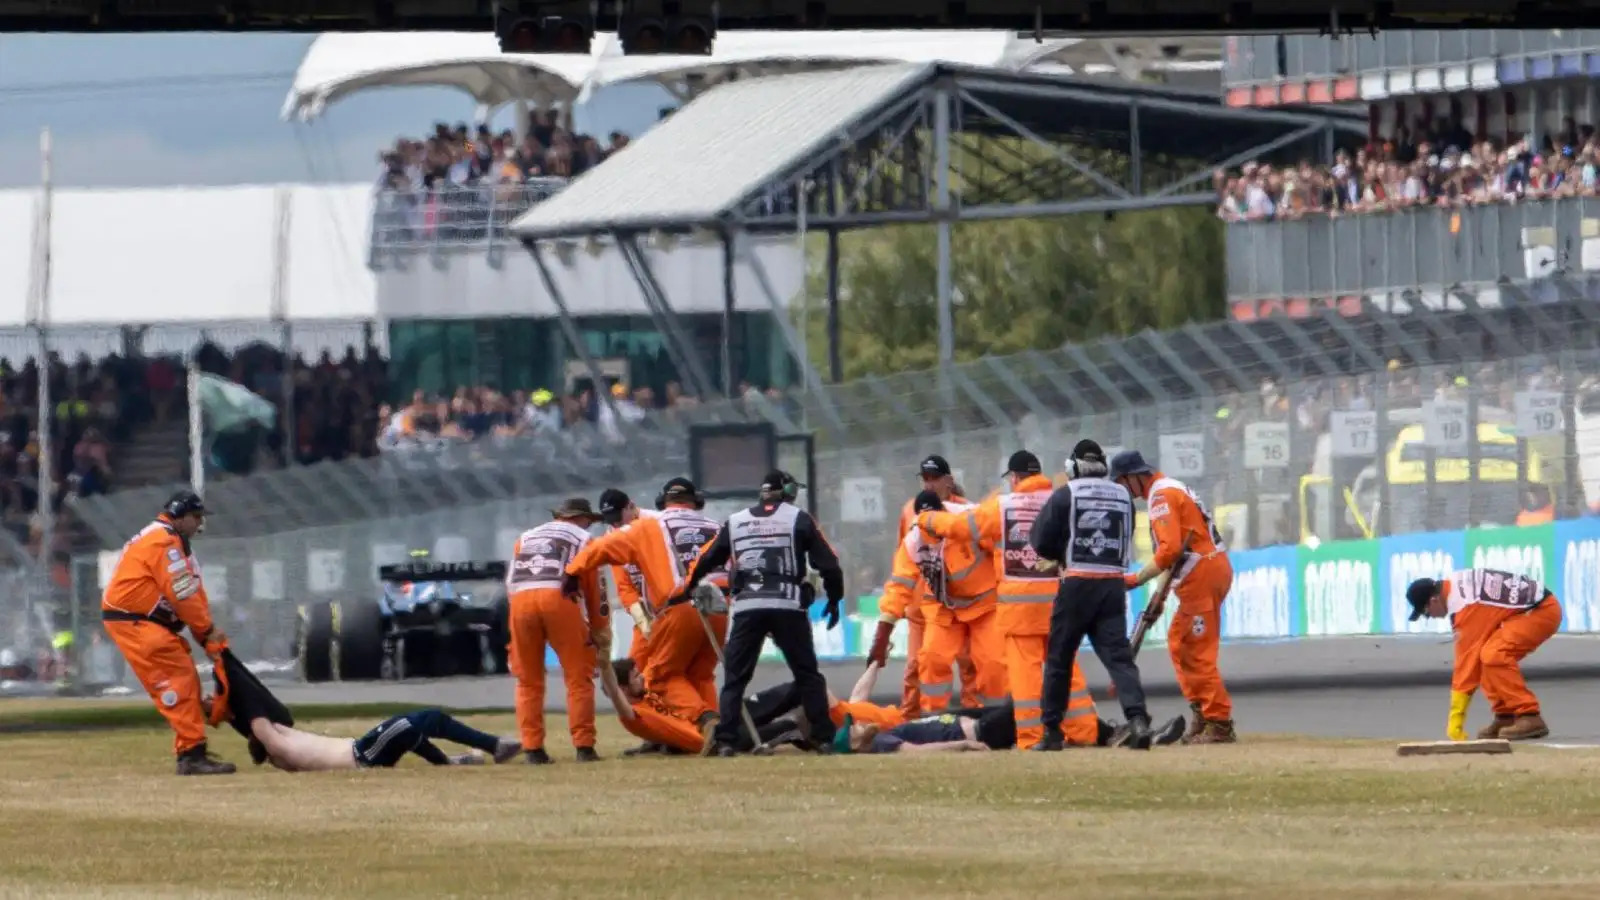 Protestors are dragged away from the Silverstone circuit. Silverstone, July 2022.